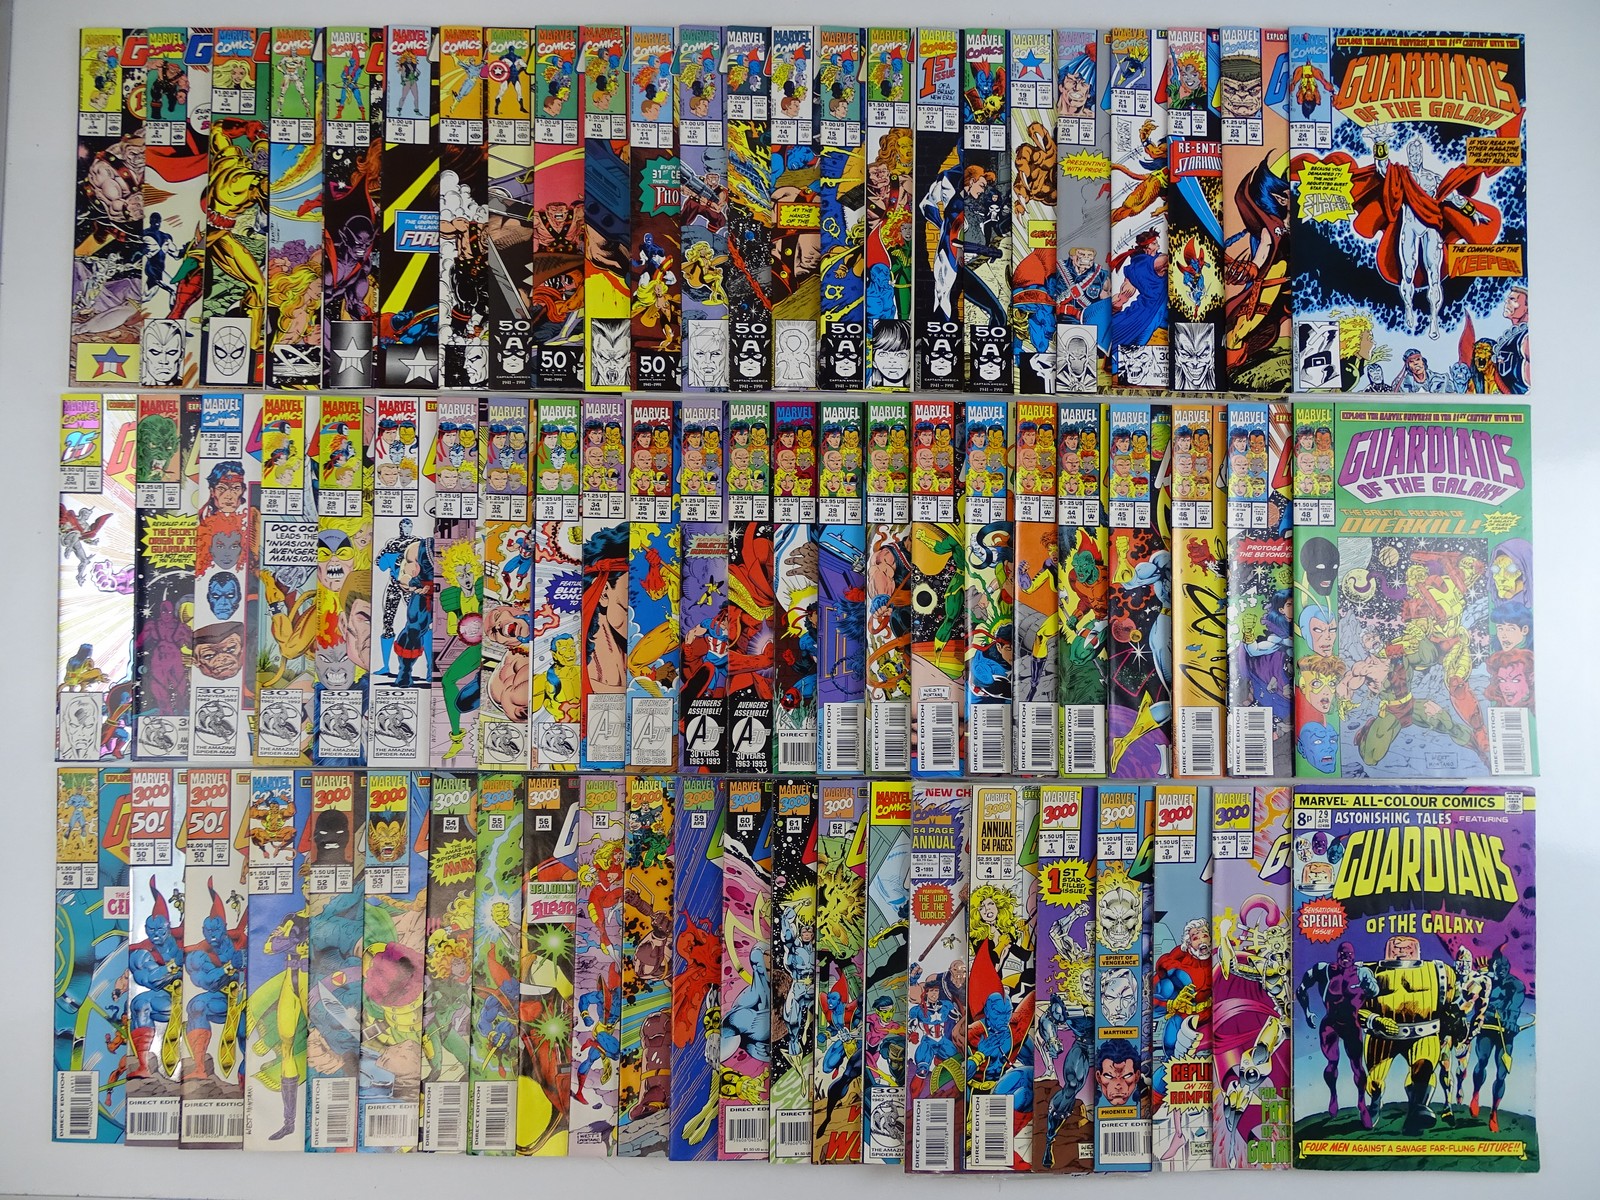 GUARDIANS OF THE GALAXY LOT (71 in Lot) - (MARVEL) - Includes GUARDIANS OF THE GALAXY (1990/95) #1 -